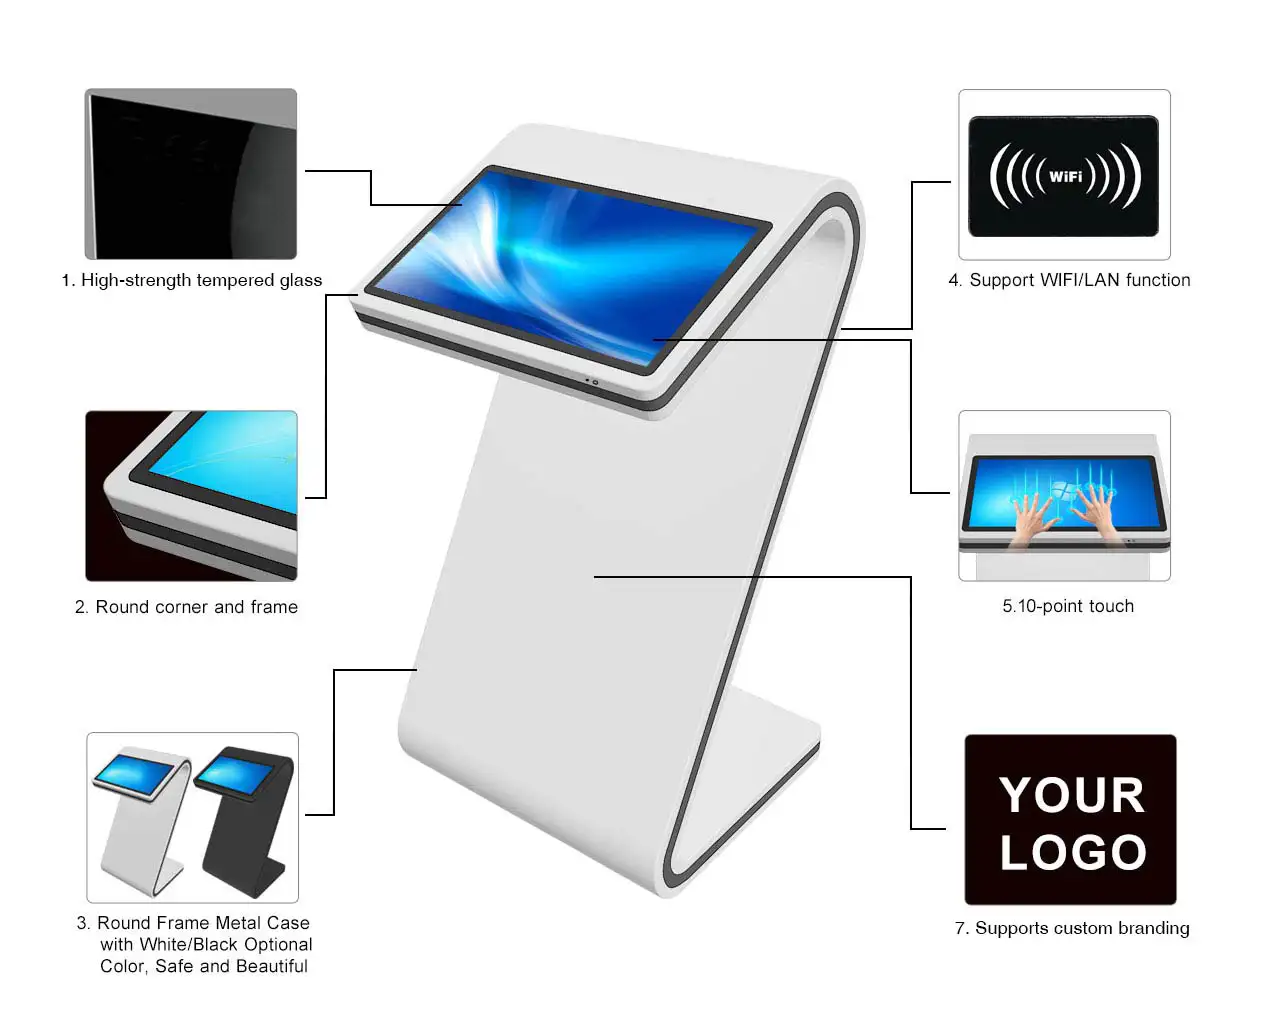 Angled-S Touch Kiosk features